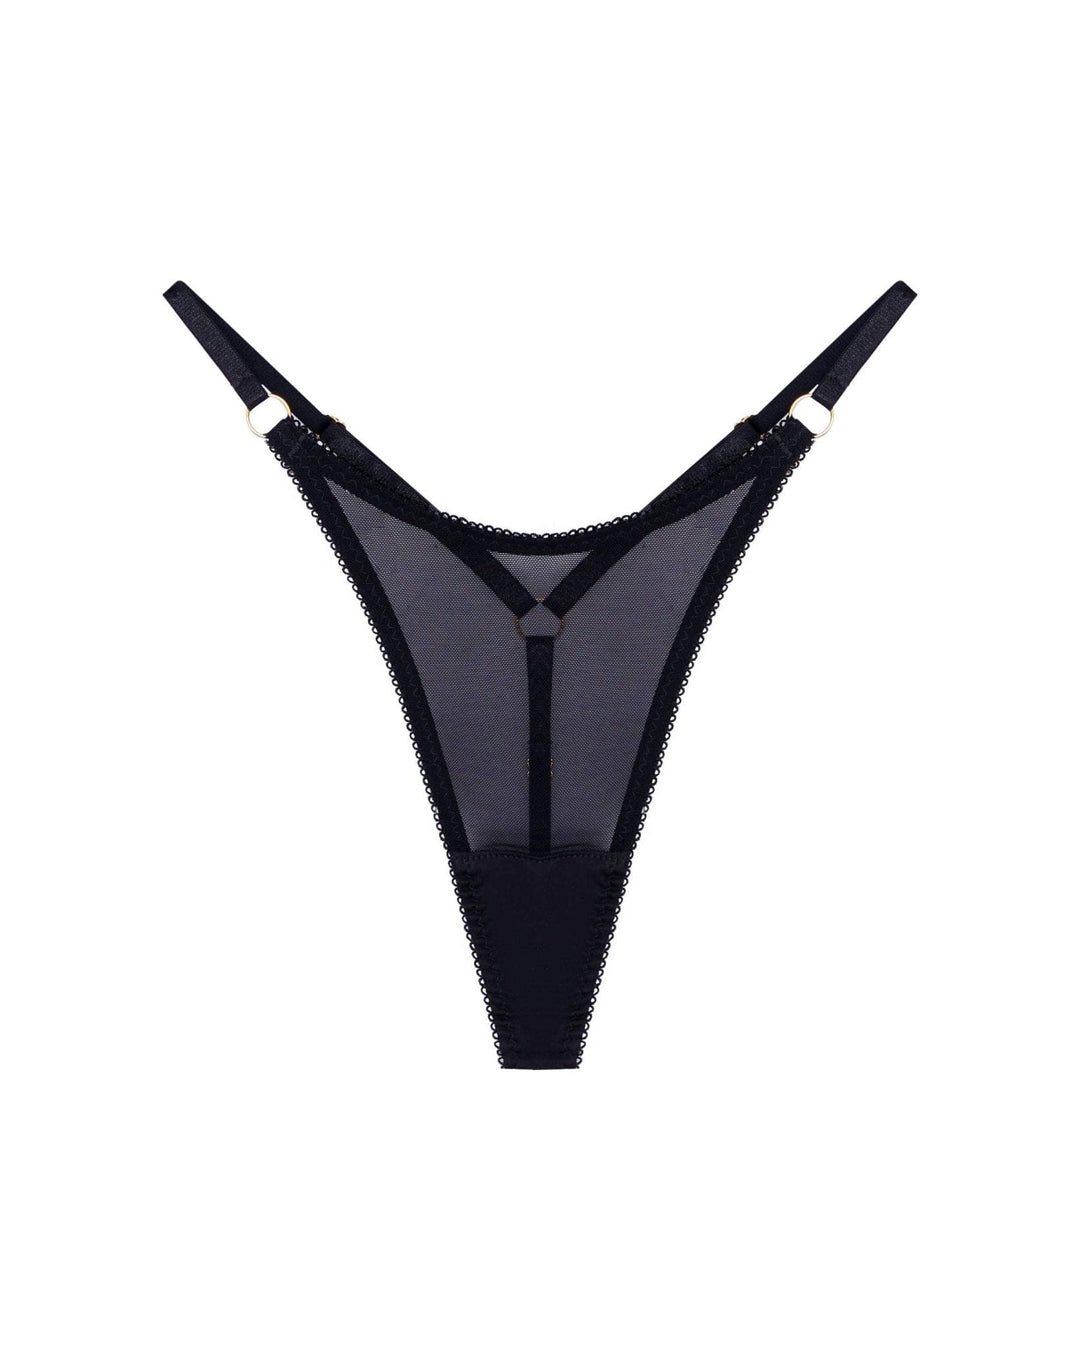 Vivi Leigh London lingerie Black Mesh Strappy Thong sexy harness luxury lingerie uk sustainable brand